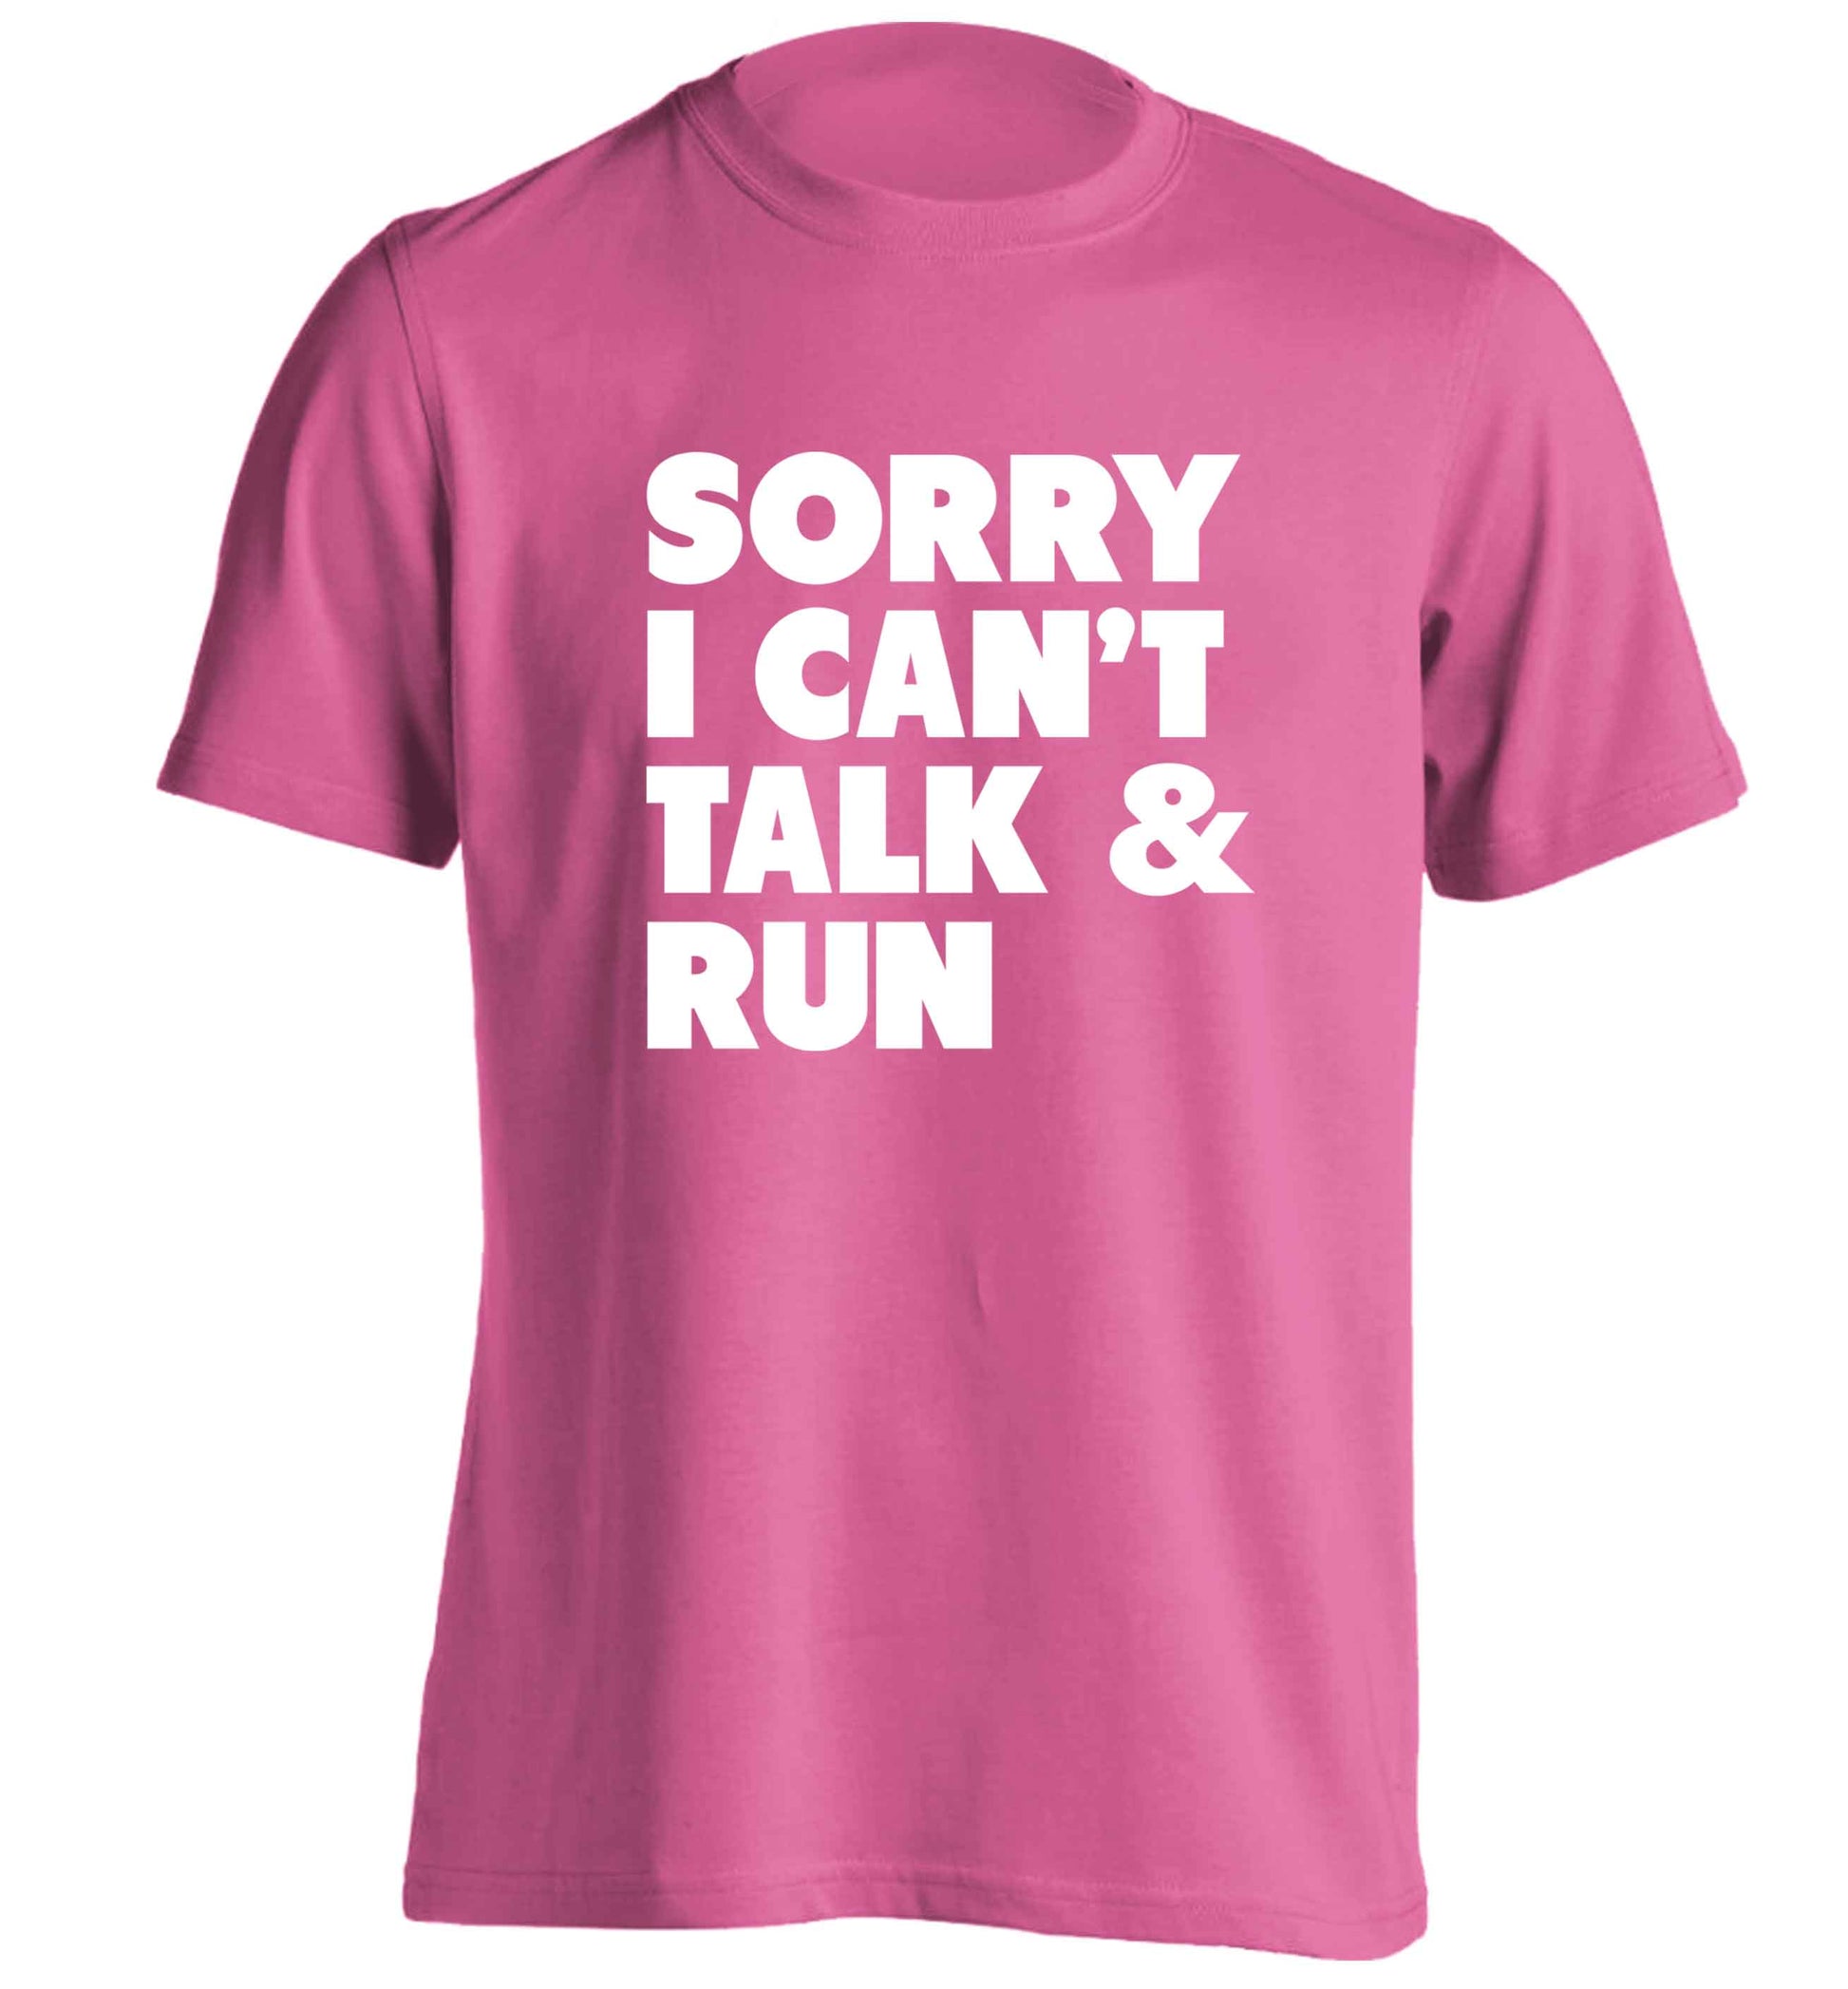 Sorry I can't talk and run adults unisex pink Tshirt 2XL